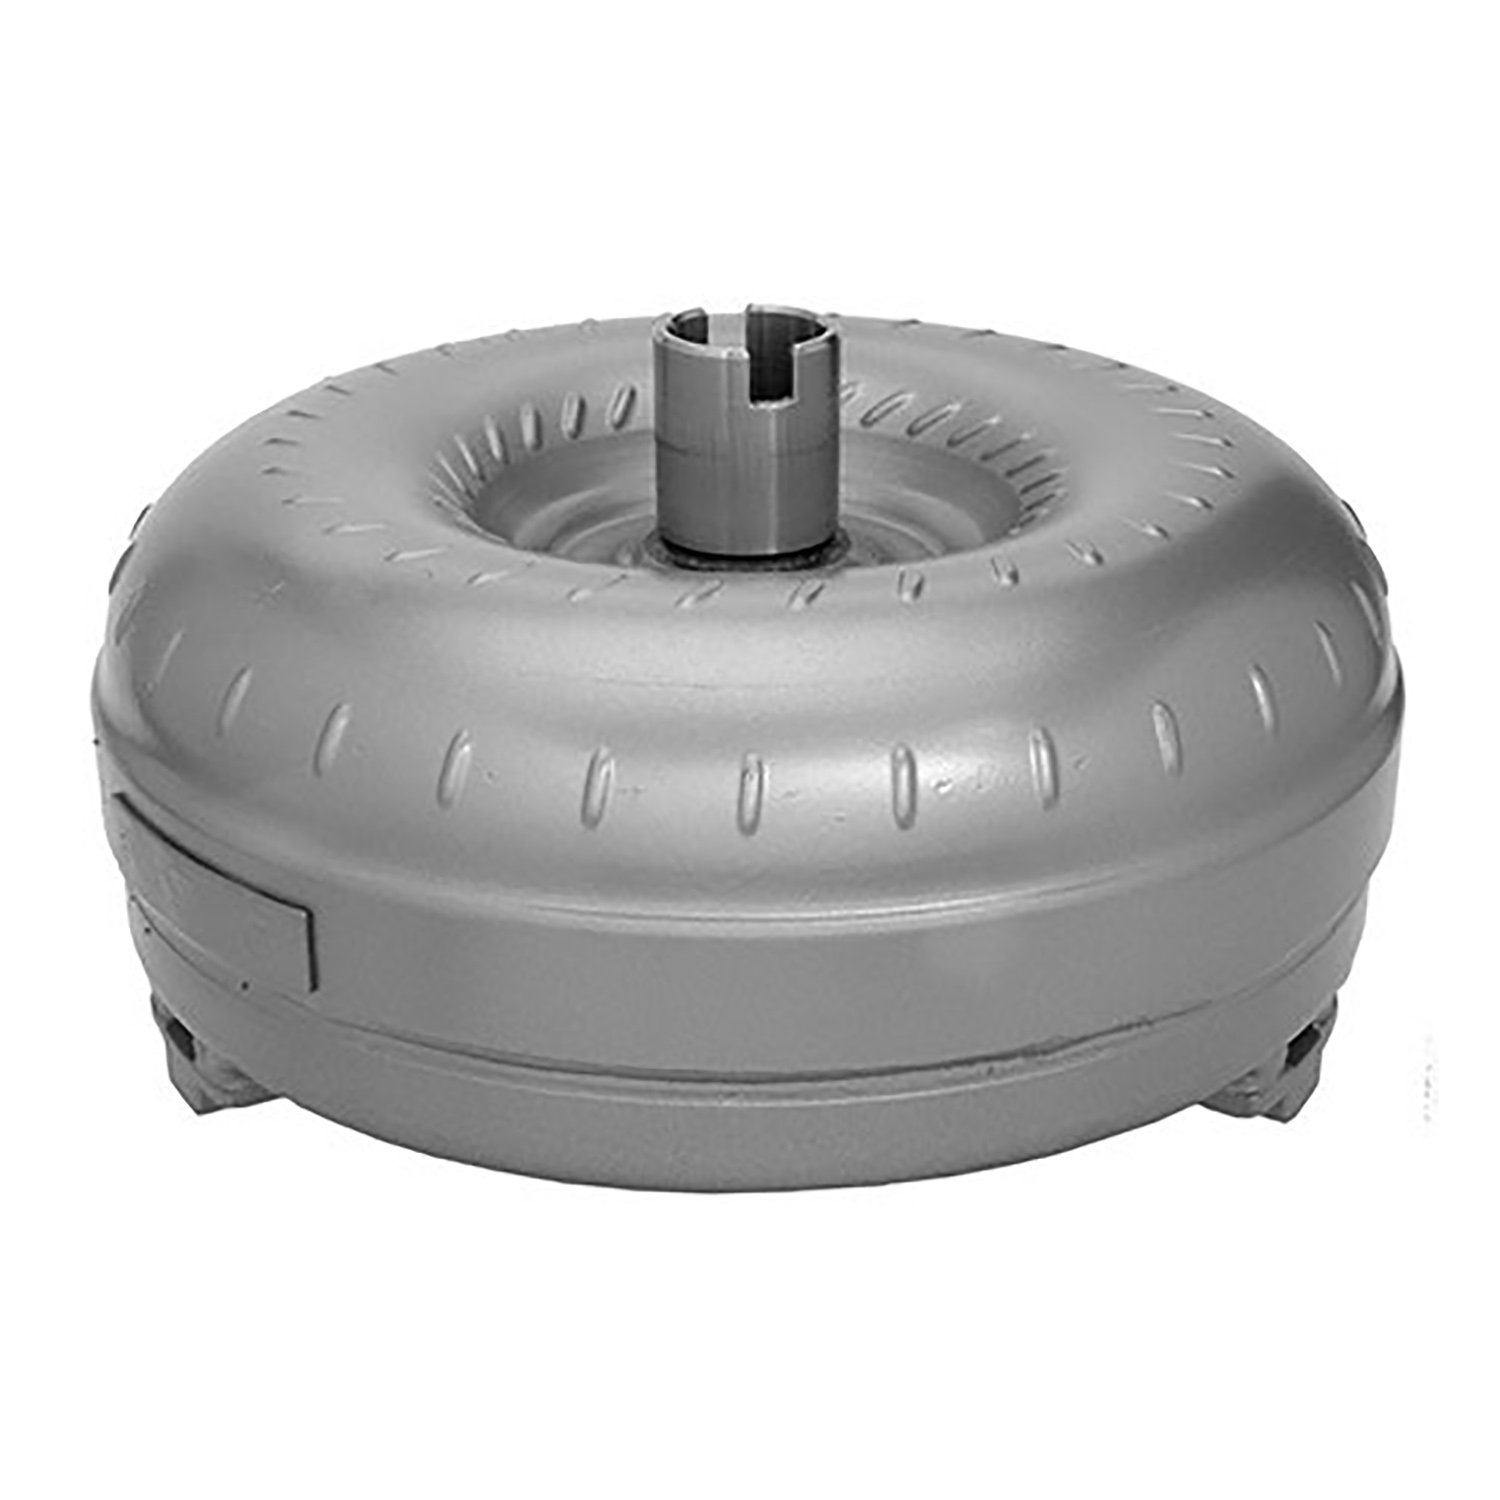 Remanufactured Automatic Transmission Torque Converter for GM 4L60 99-13 4.8